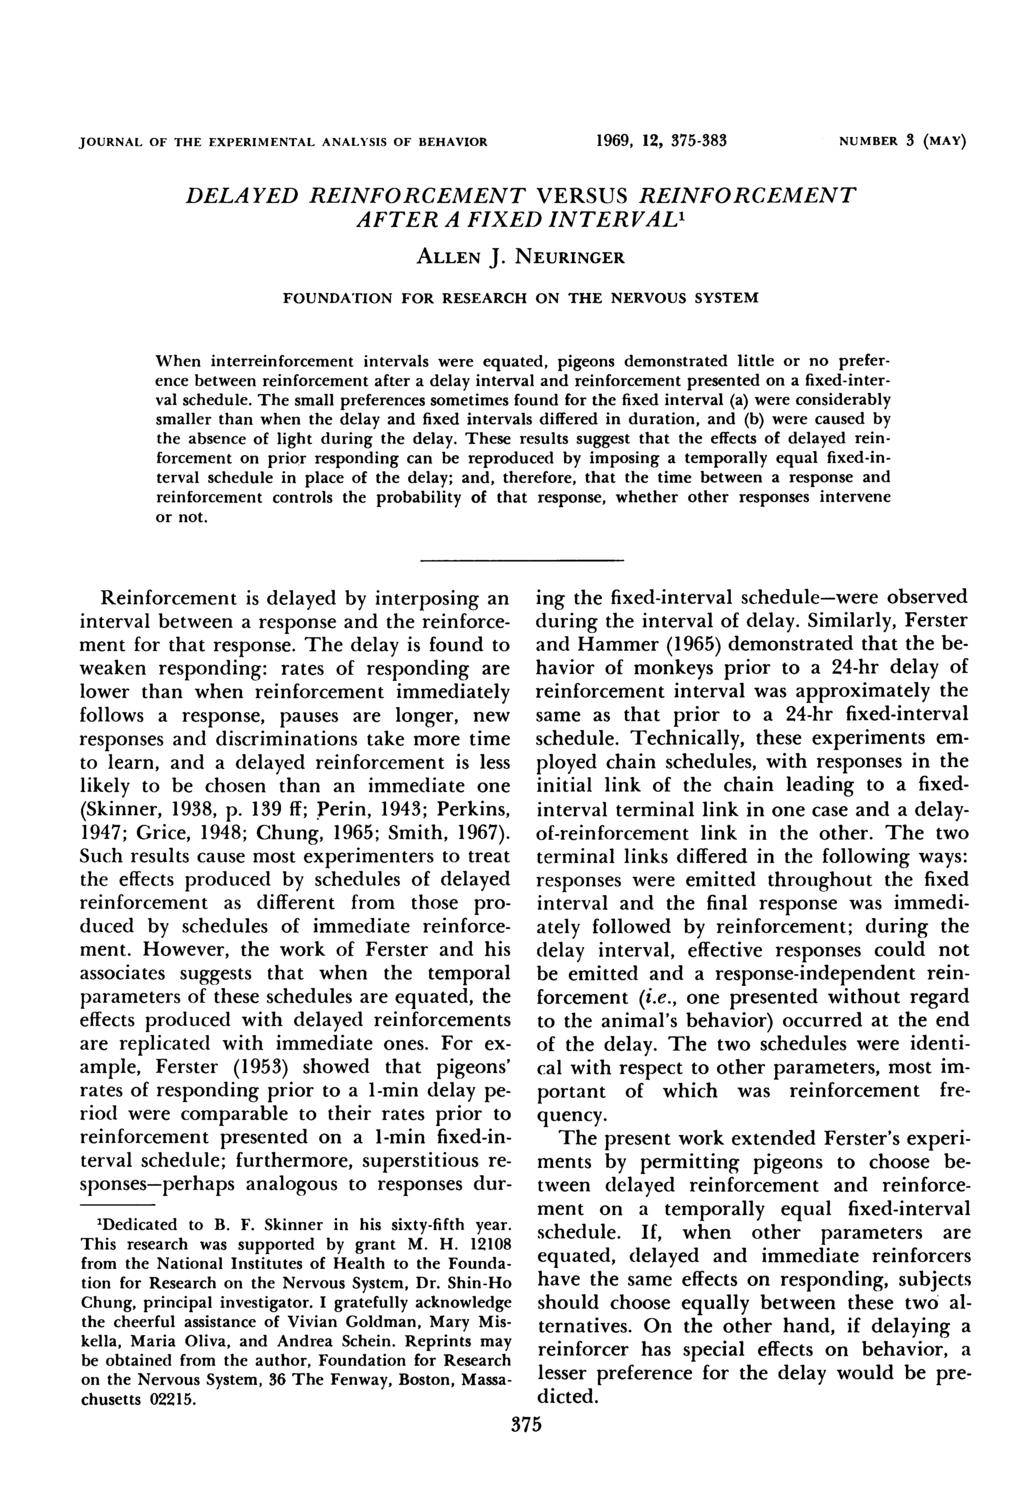 JOURNAL OF THE EXPERIMENTAL ANALYSIS OF BEHAIOR 1969, 12, 375-383 NUMBER 3 (MAY) DELA YED REINFORCEMENT ERSUS REINFORCEMENT AFTER A FIXED INTERAL' ALLEN J.